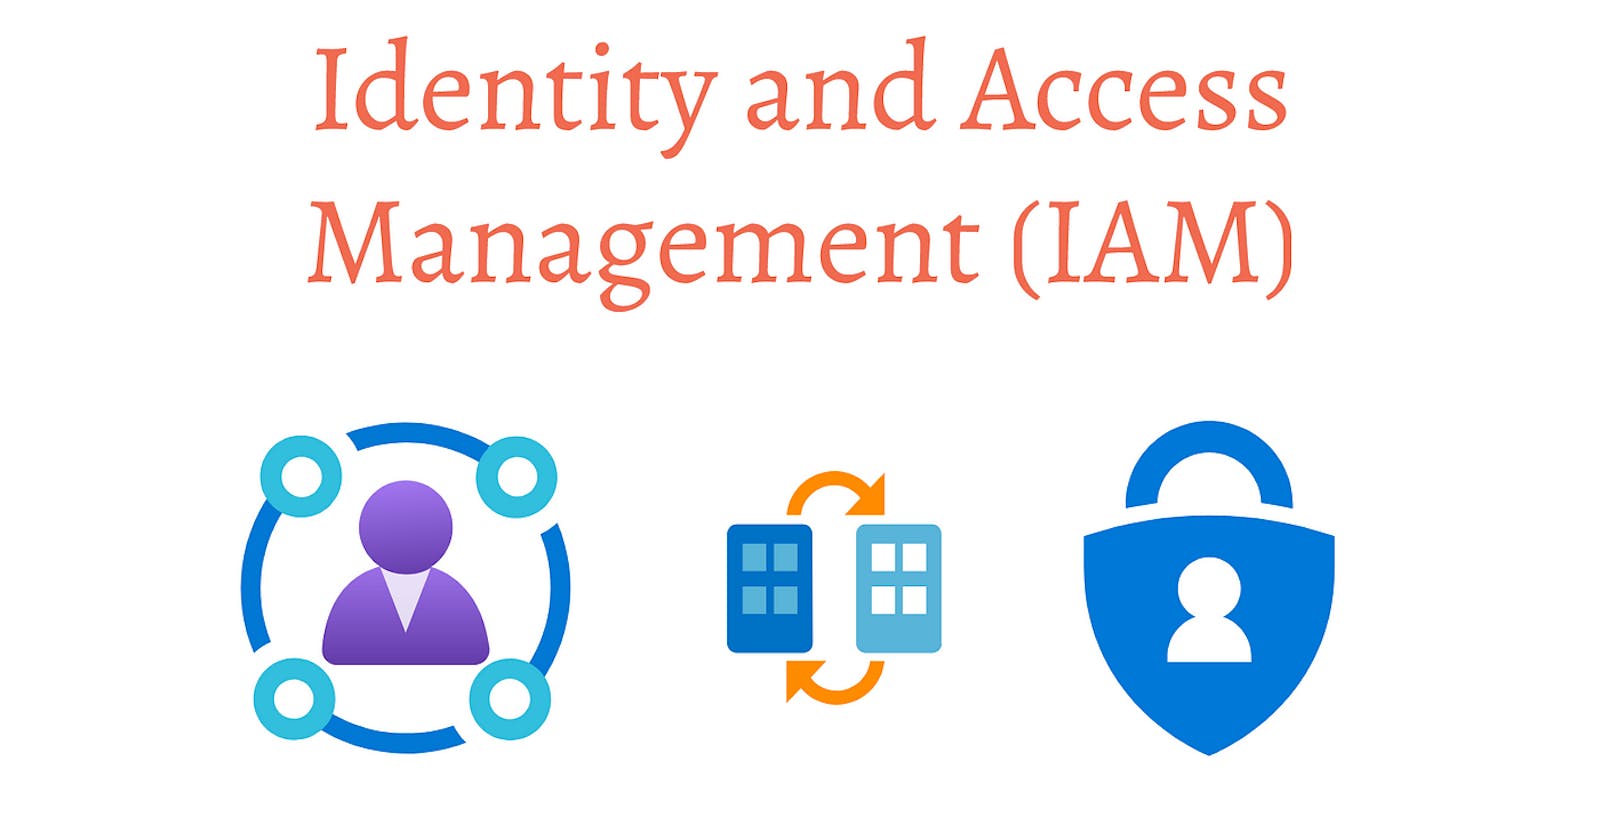 Demystifying Azure Identity and Access Management